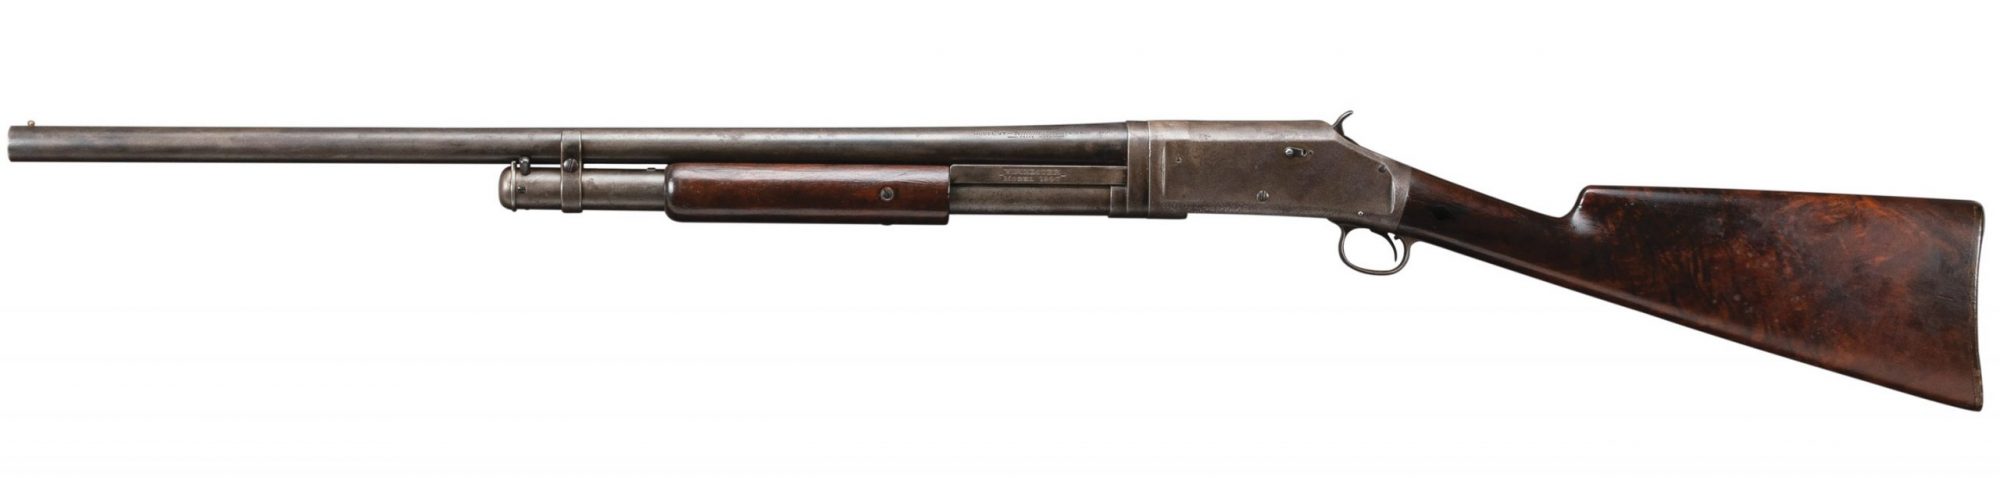 Photo of a restored Winchester Model 1897 shotgun, before restoration work by Turnbull Restoration of Bloomfield NY